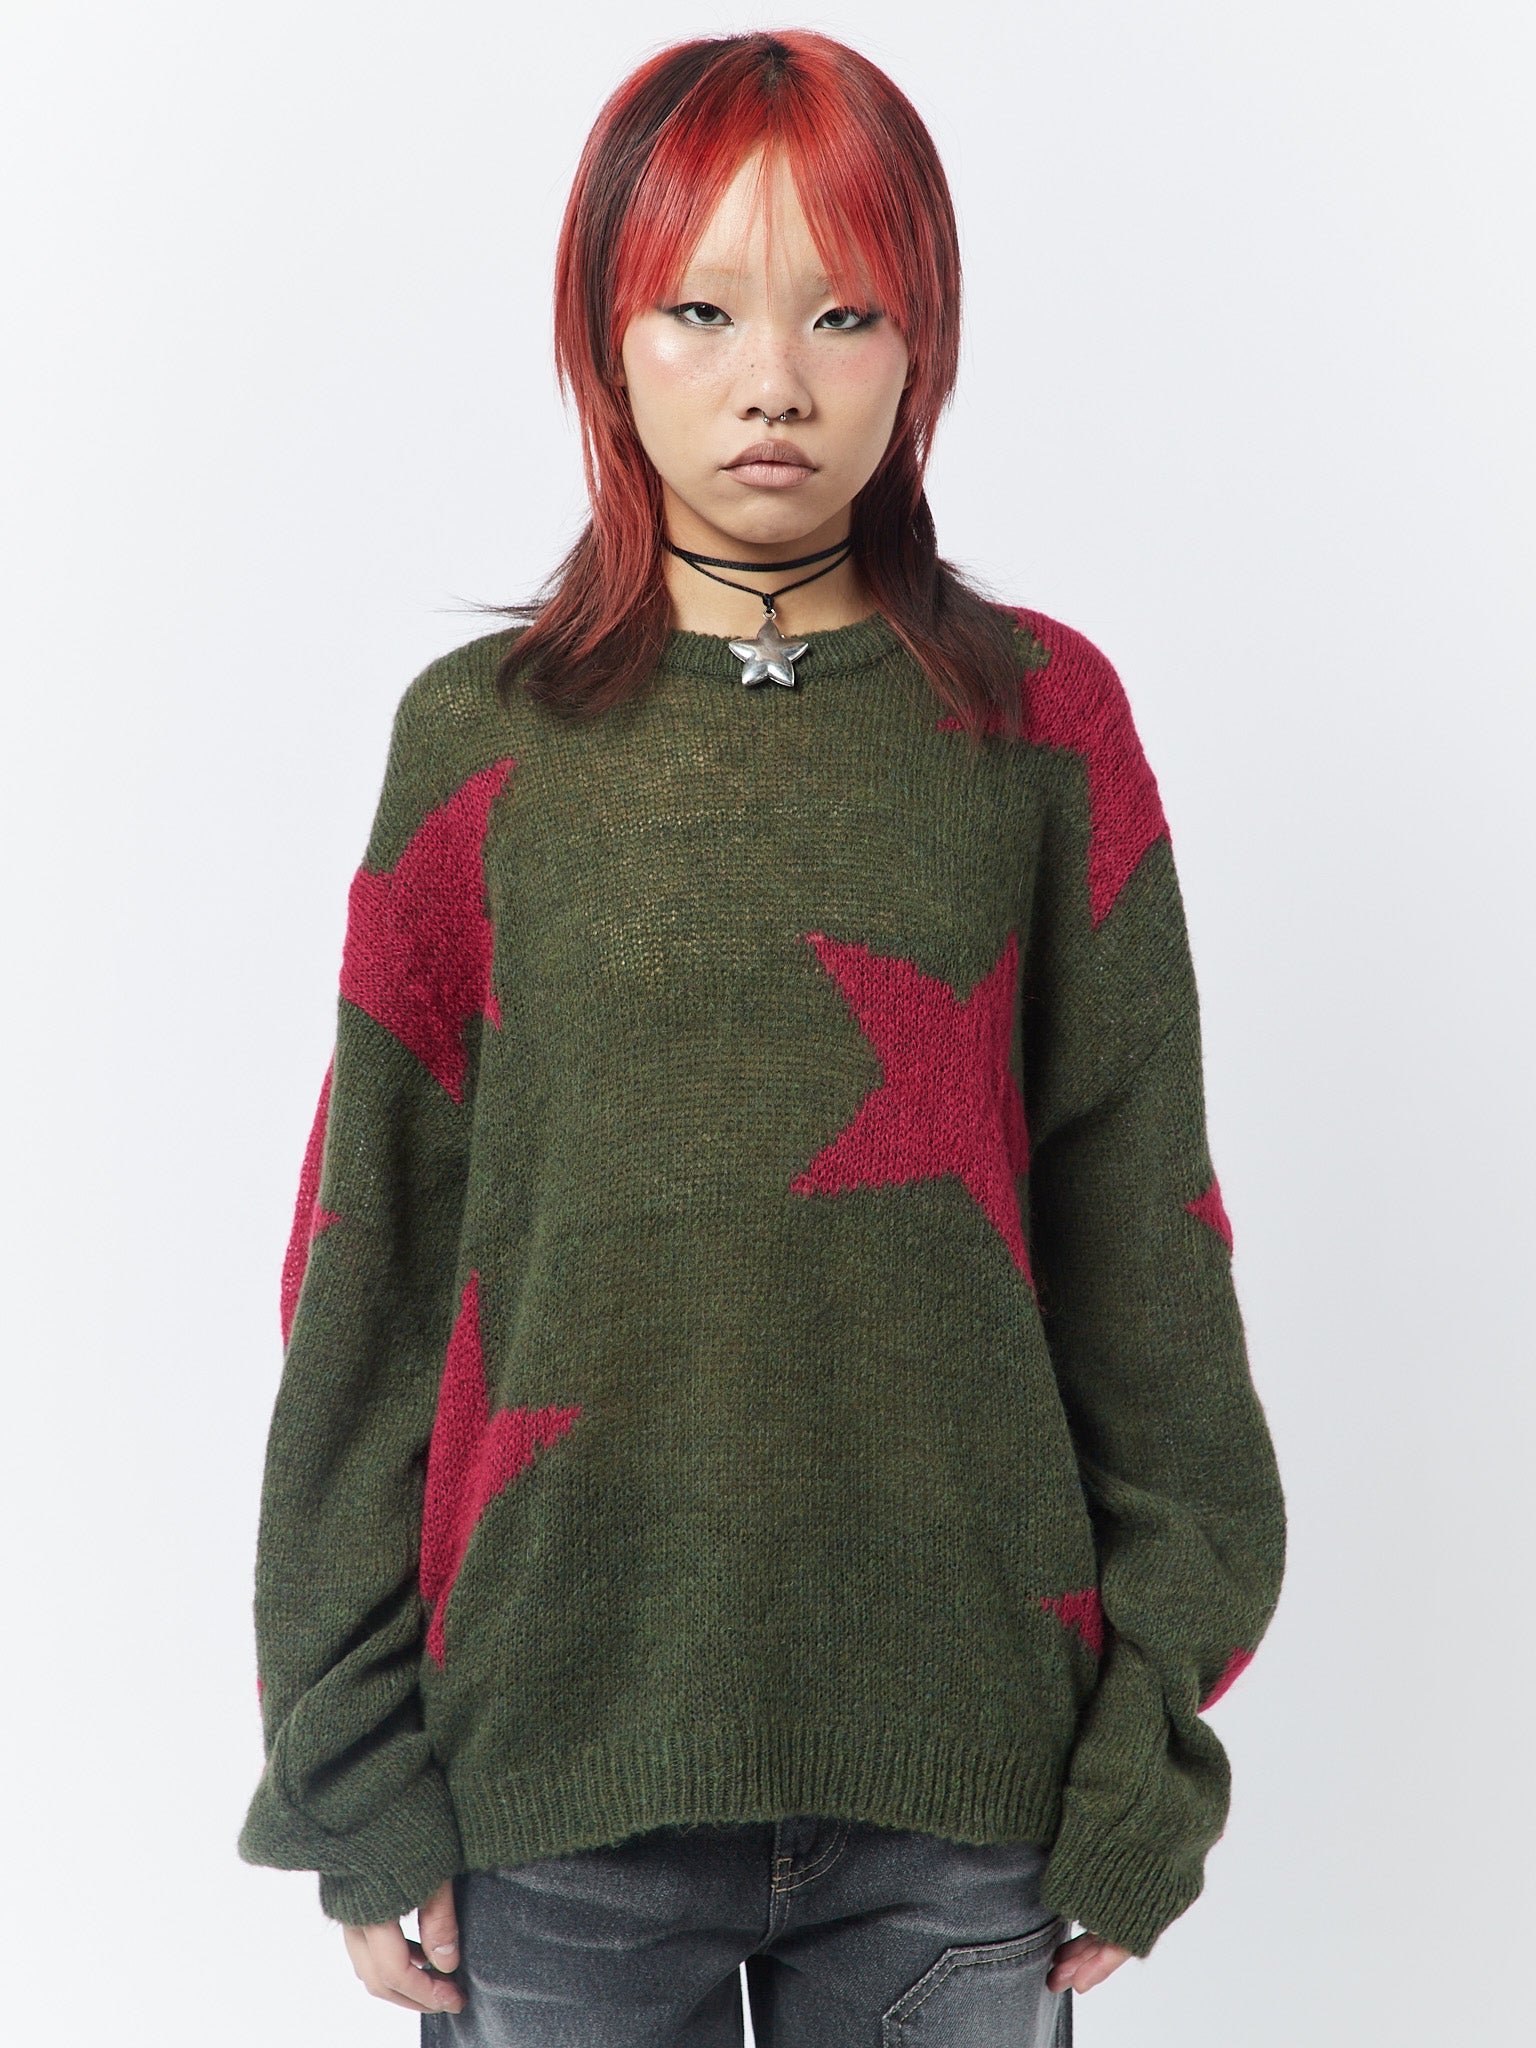 Pink and khaki knit sweater with stars design, perfect for a cozy and stylish look.